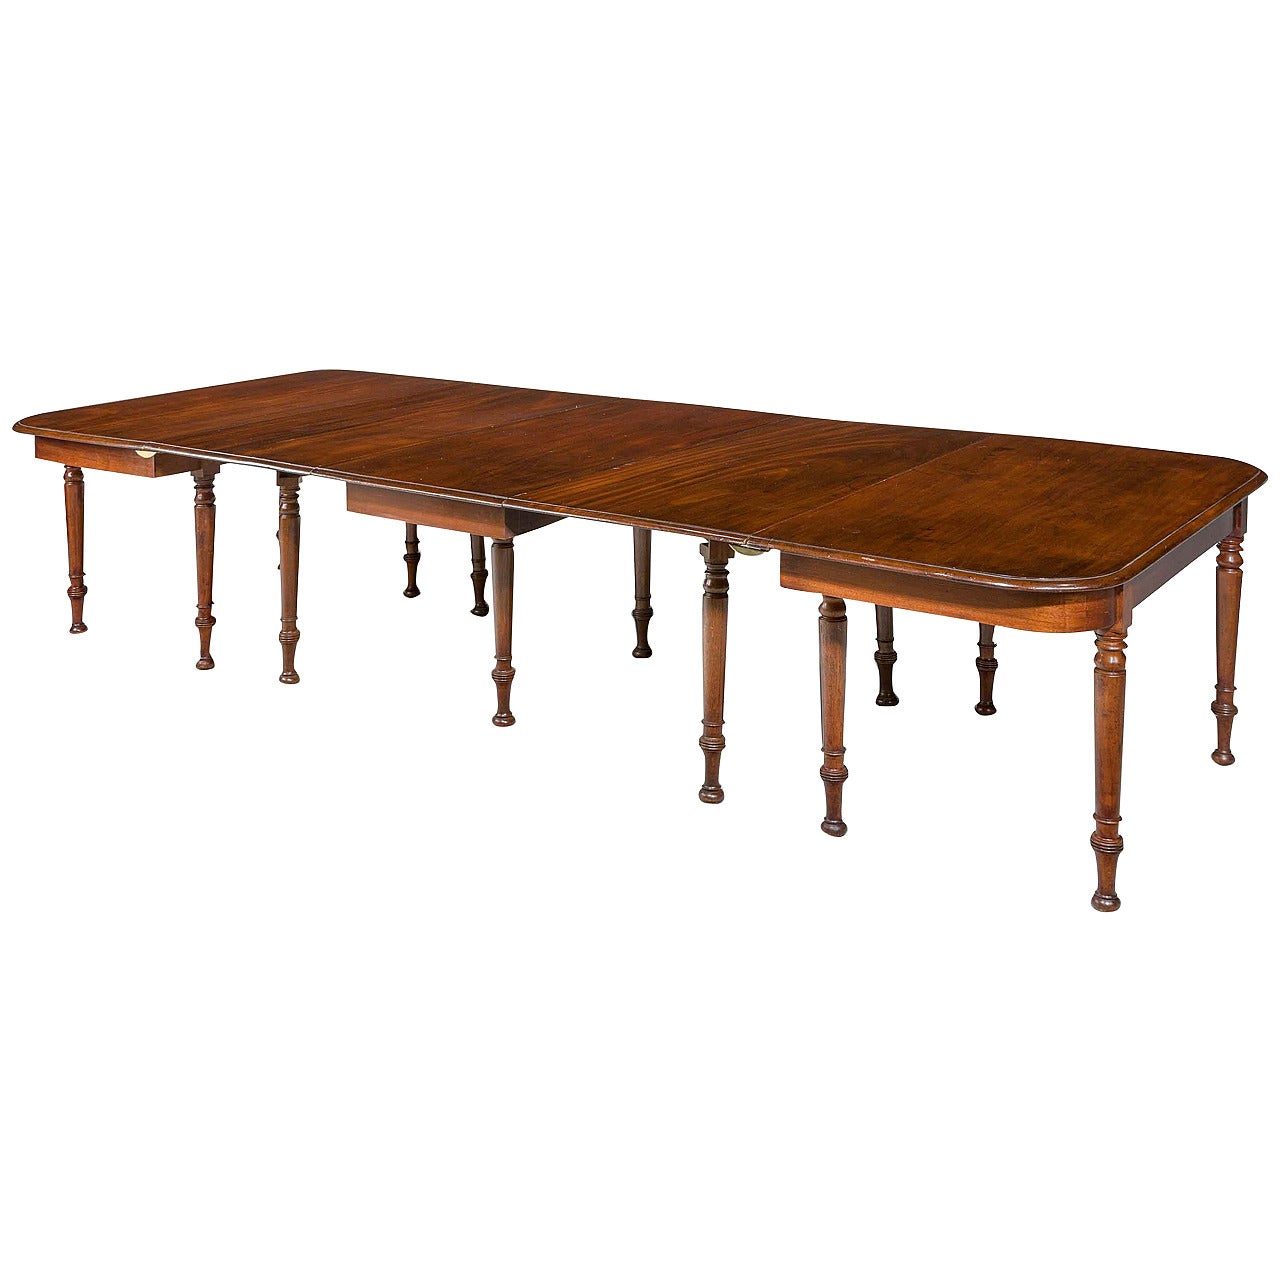 Late Regency Period Three-Part Dining Table